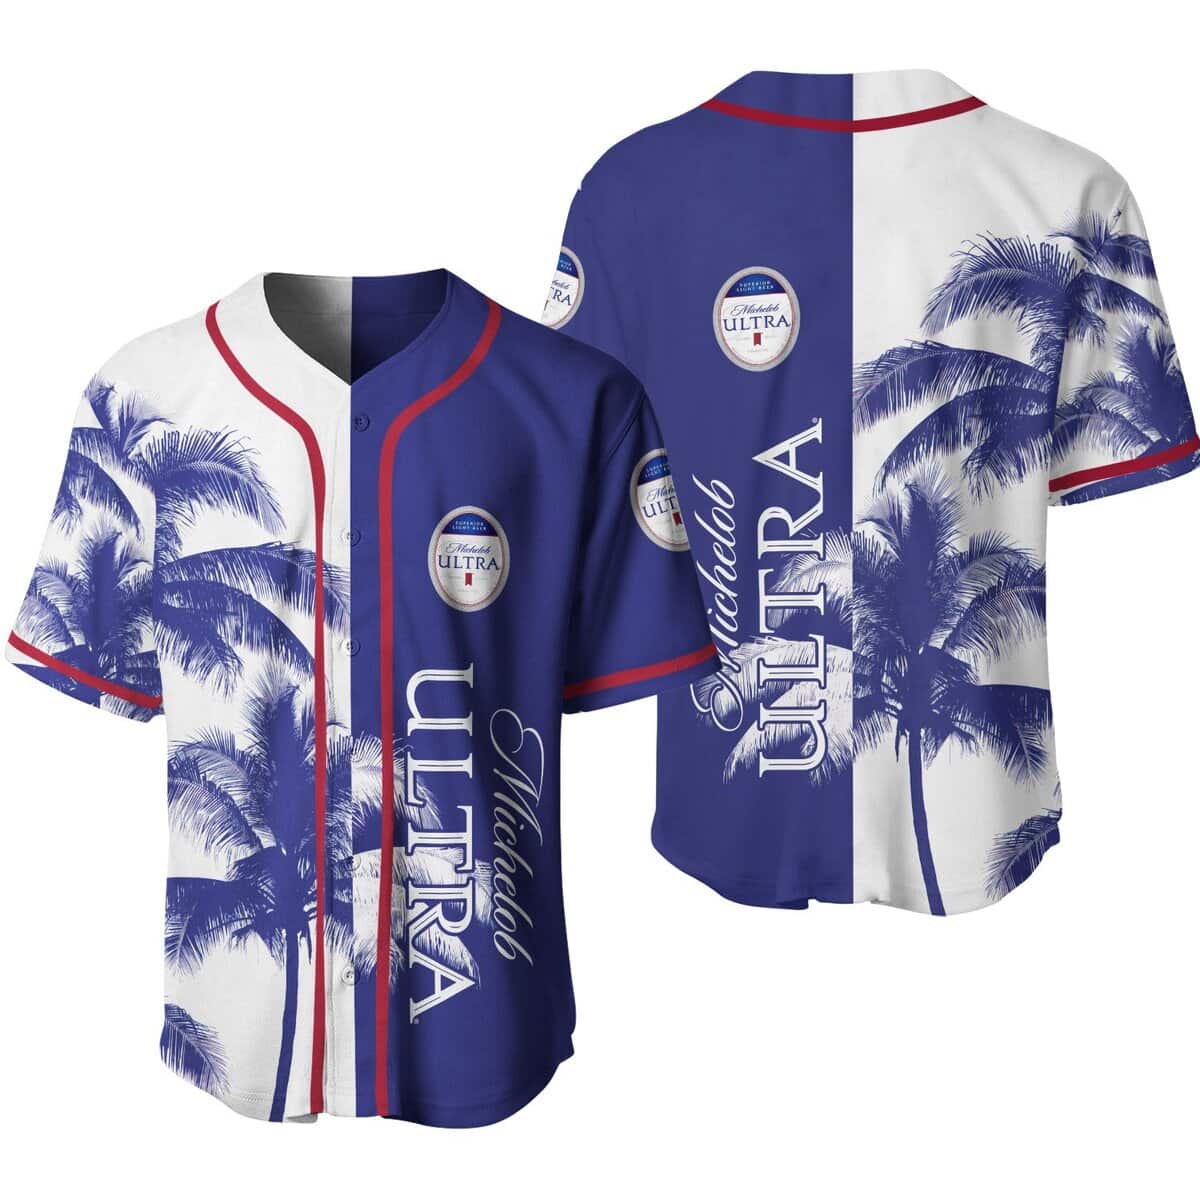 Vintage Michelob ULTRA Baseball Jersey Tropical Coconut Trees Gift For Friends